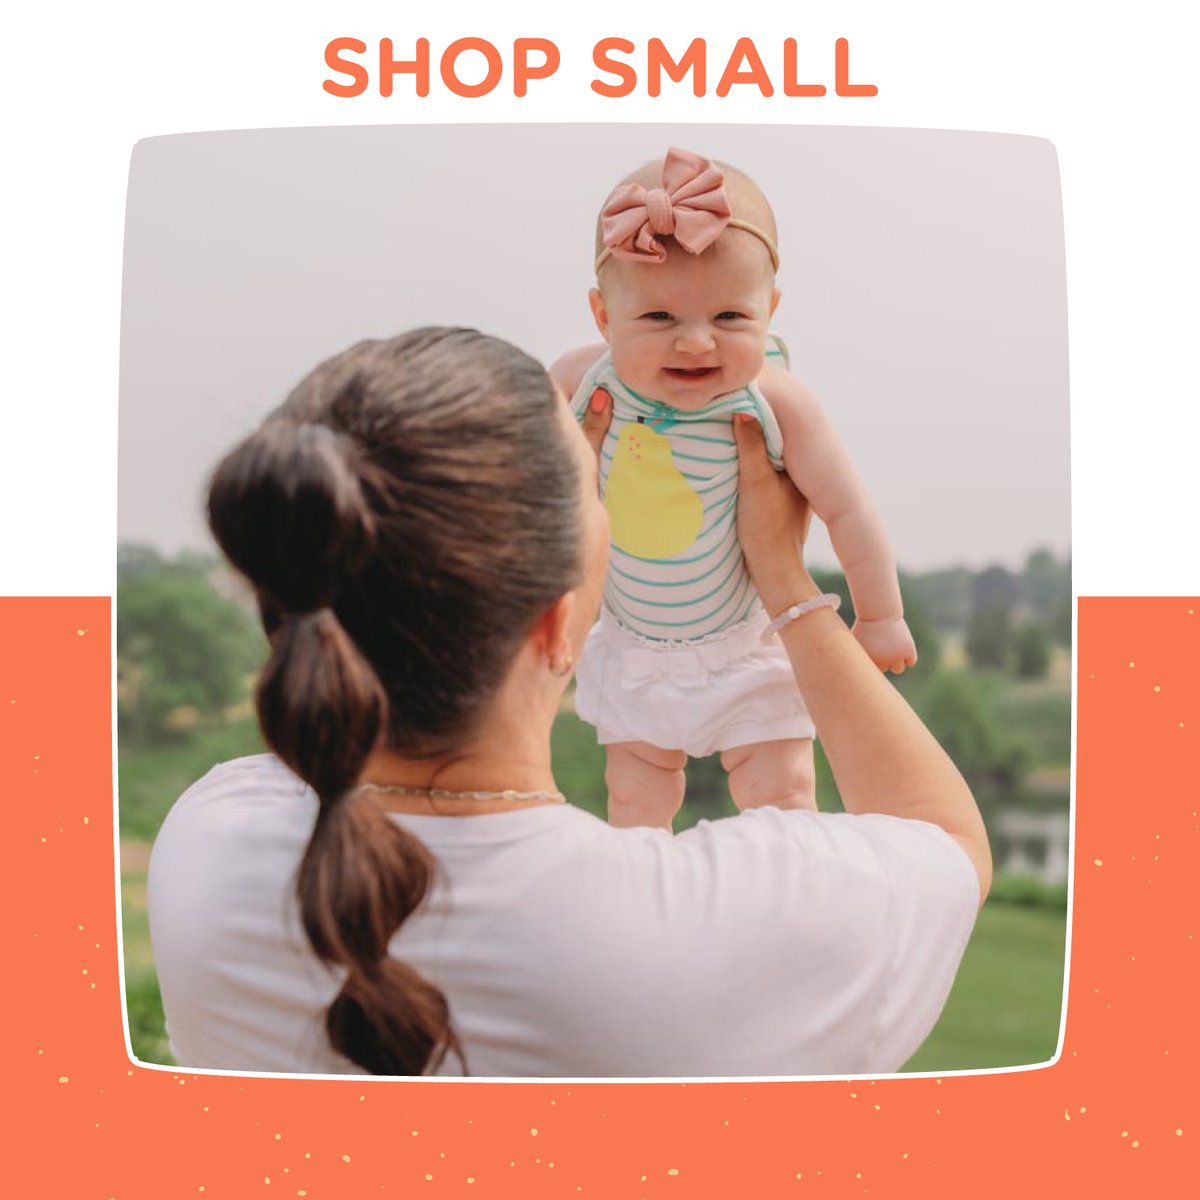 Show your love for local business when you shop for all your child’s needs at your locally owned #OnceUponAChildNeark #ShopSmall #LocalBusiness